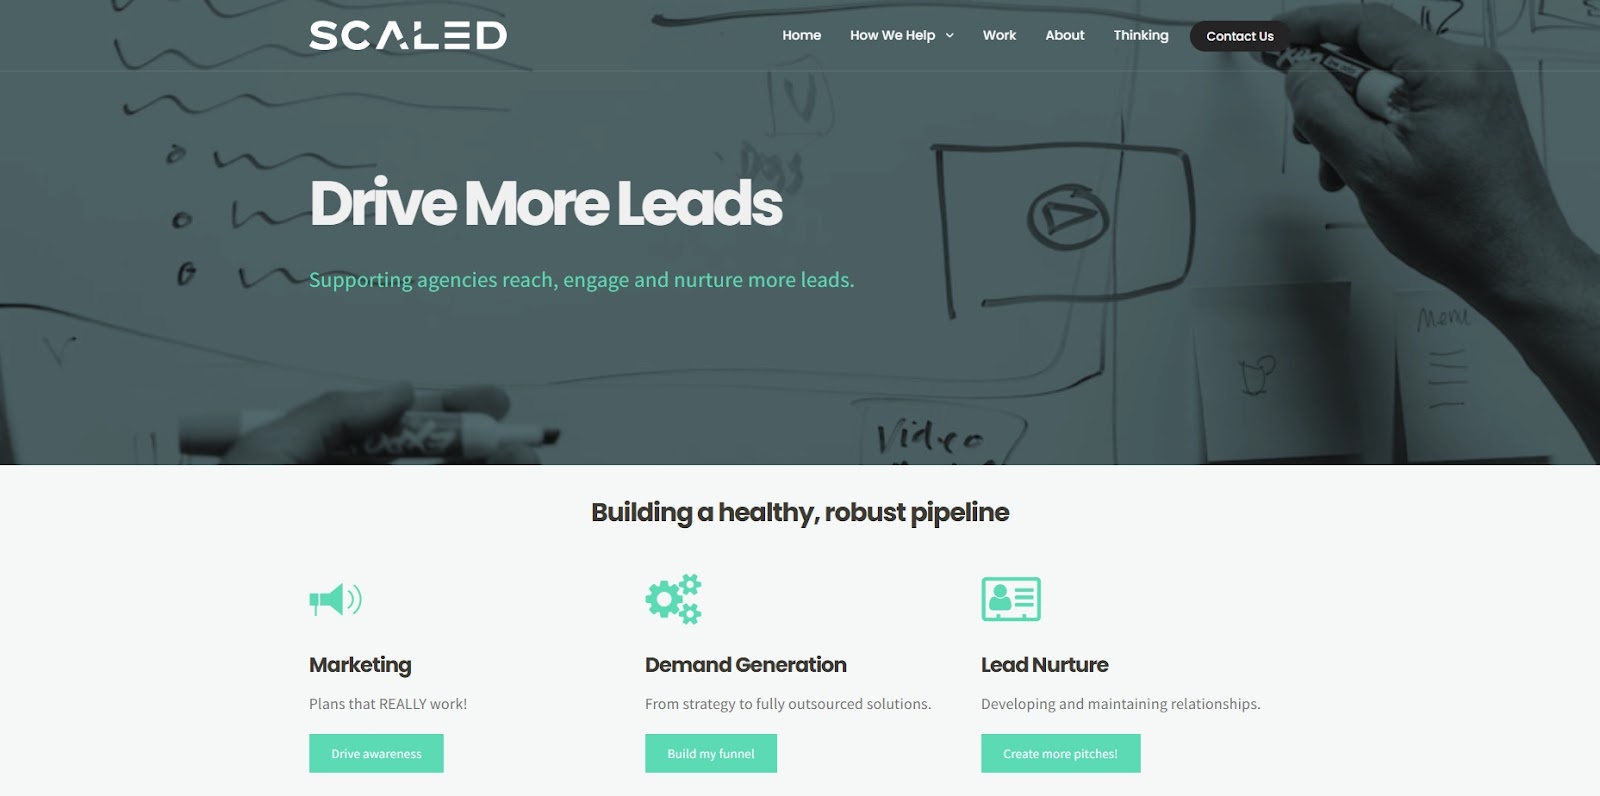 Scaled is a UK based lead generation company.